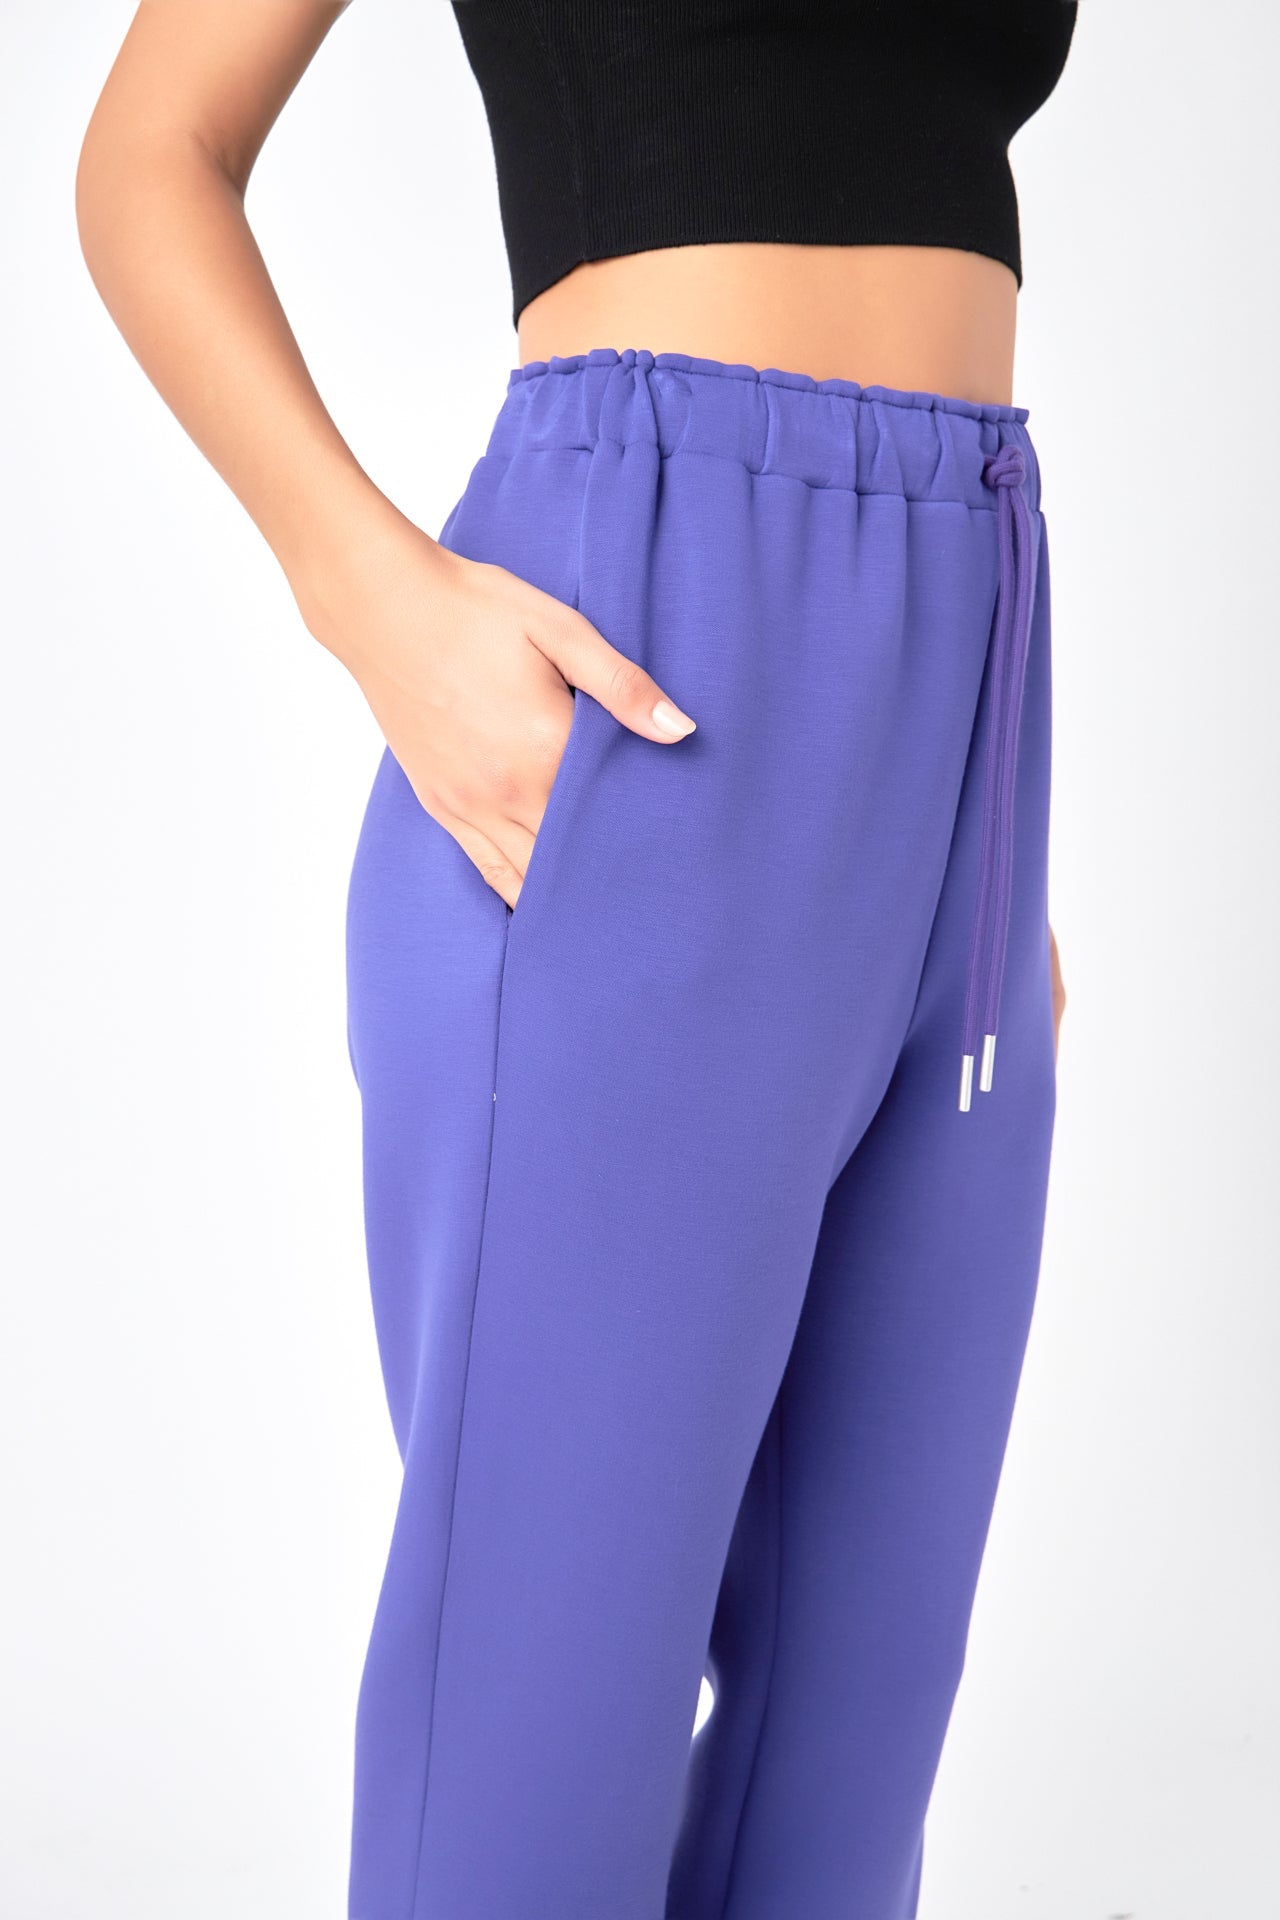 GREY LAB - Scuba Joggers - LOUNGE WEAR available at Objectrare